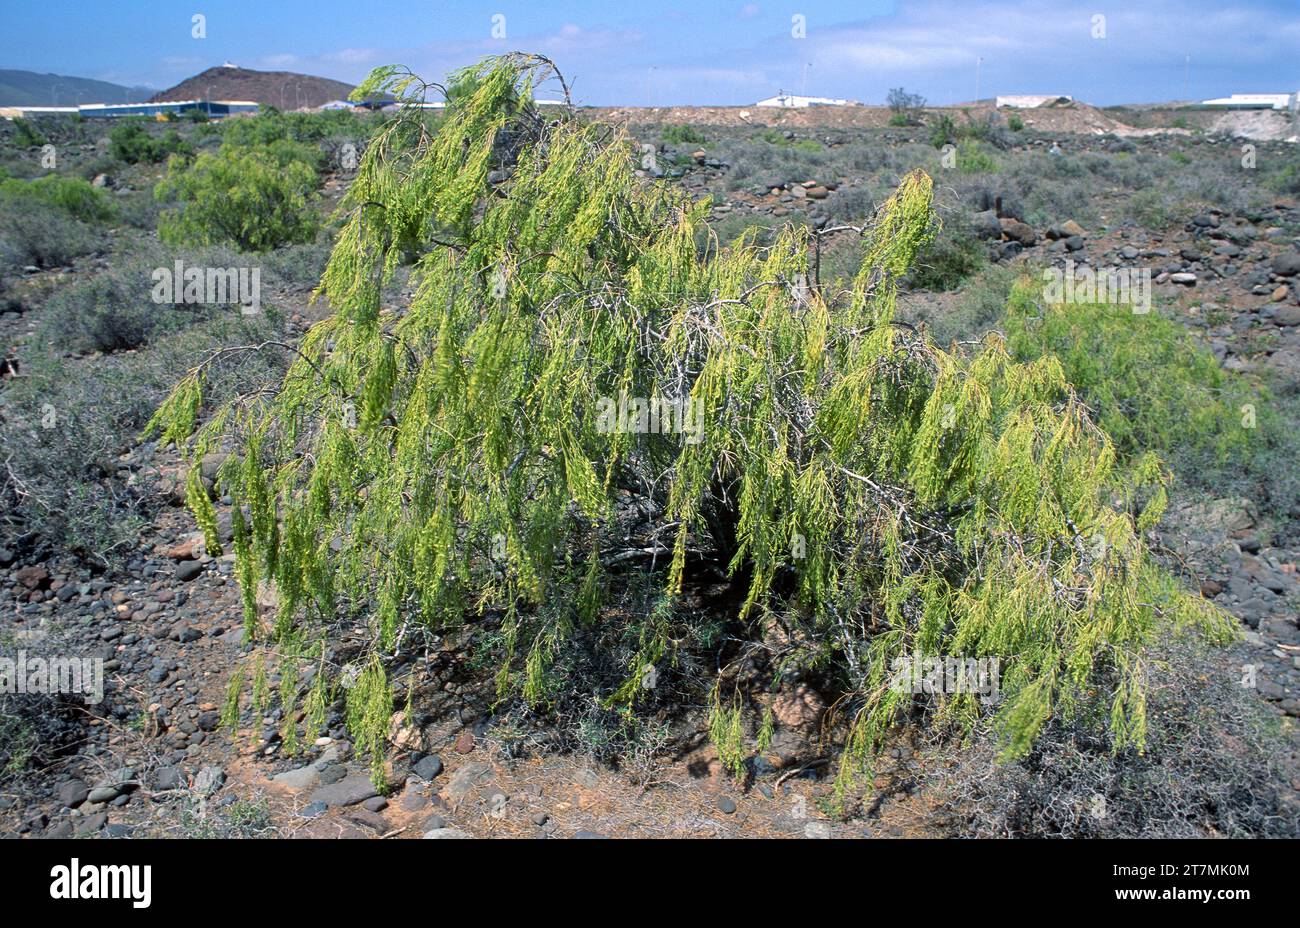 Balo (Plocama pendula) is a shrub endemic to all Canary Islands except Lanzarote. This photo was taken in Tenerife, Canary Islands, Spain. Stock Photo